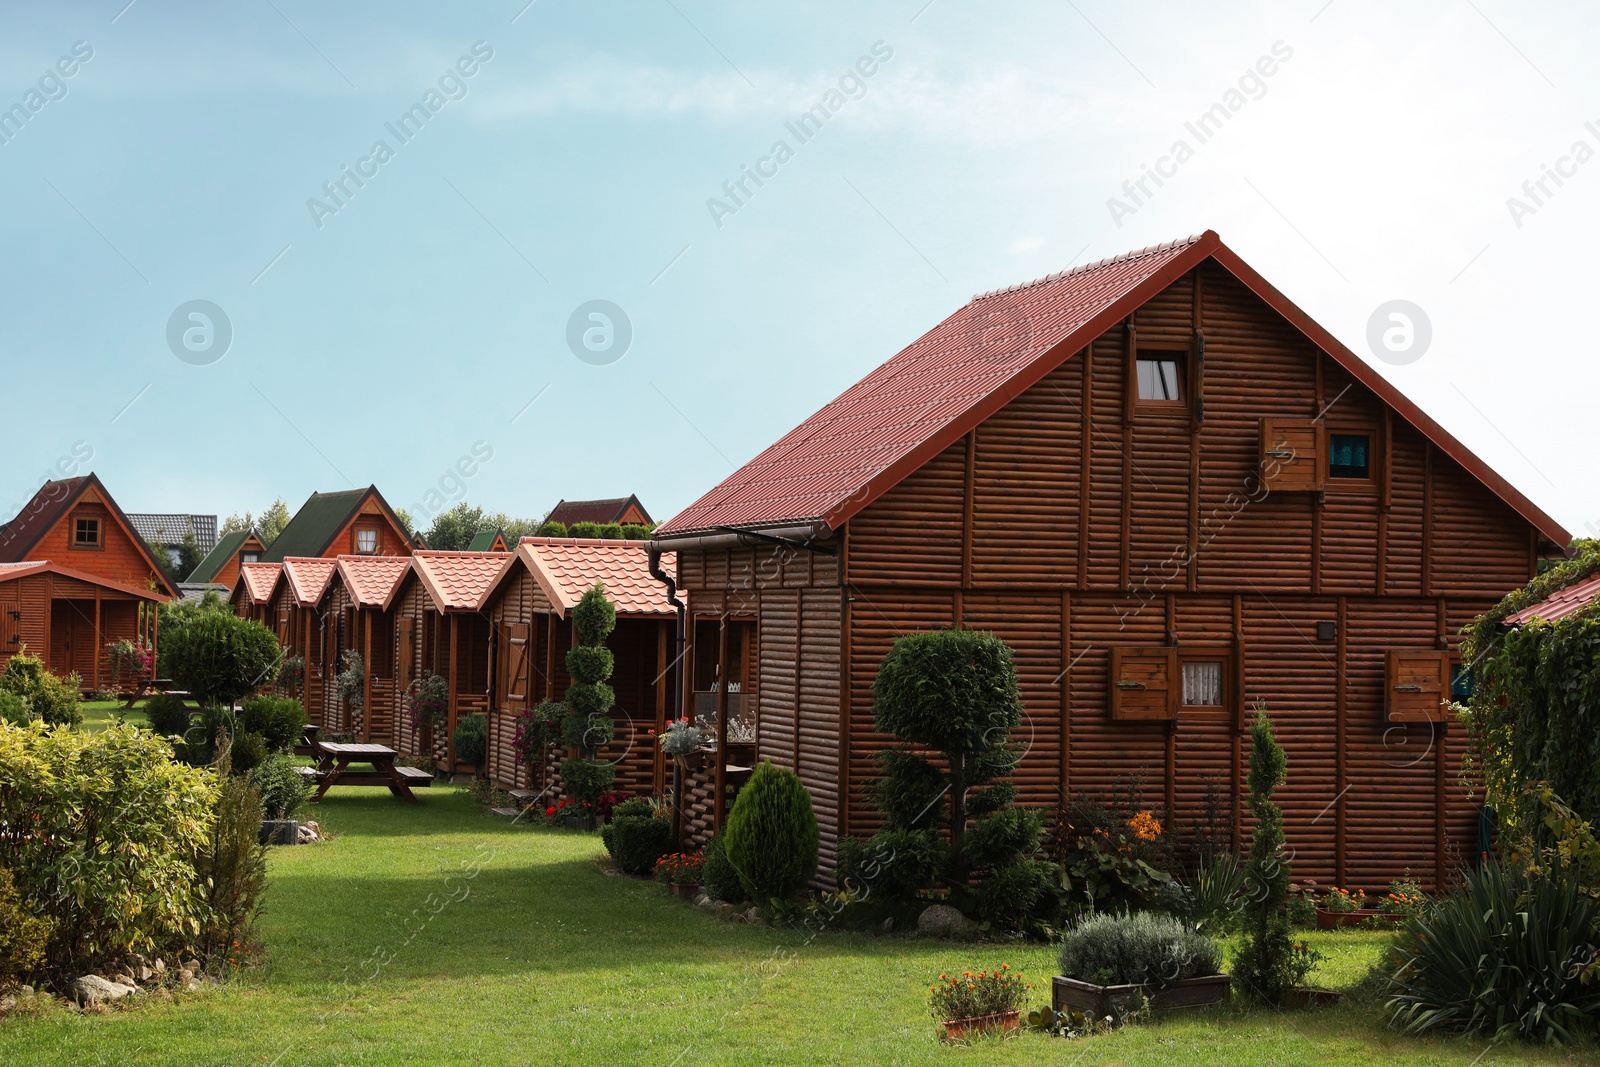 Photo of Beautiful wooden beach houses and green trees outdoors